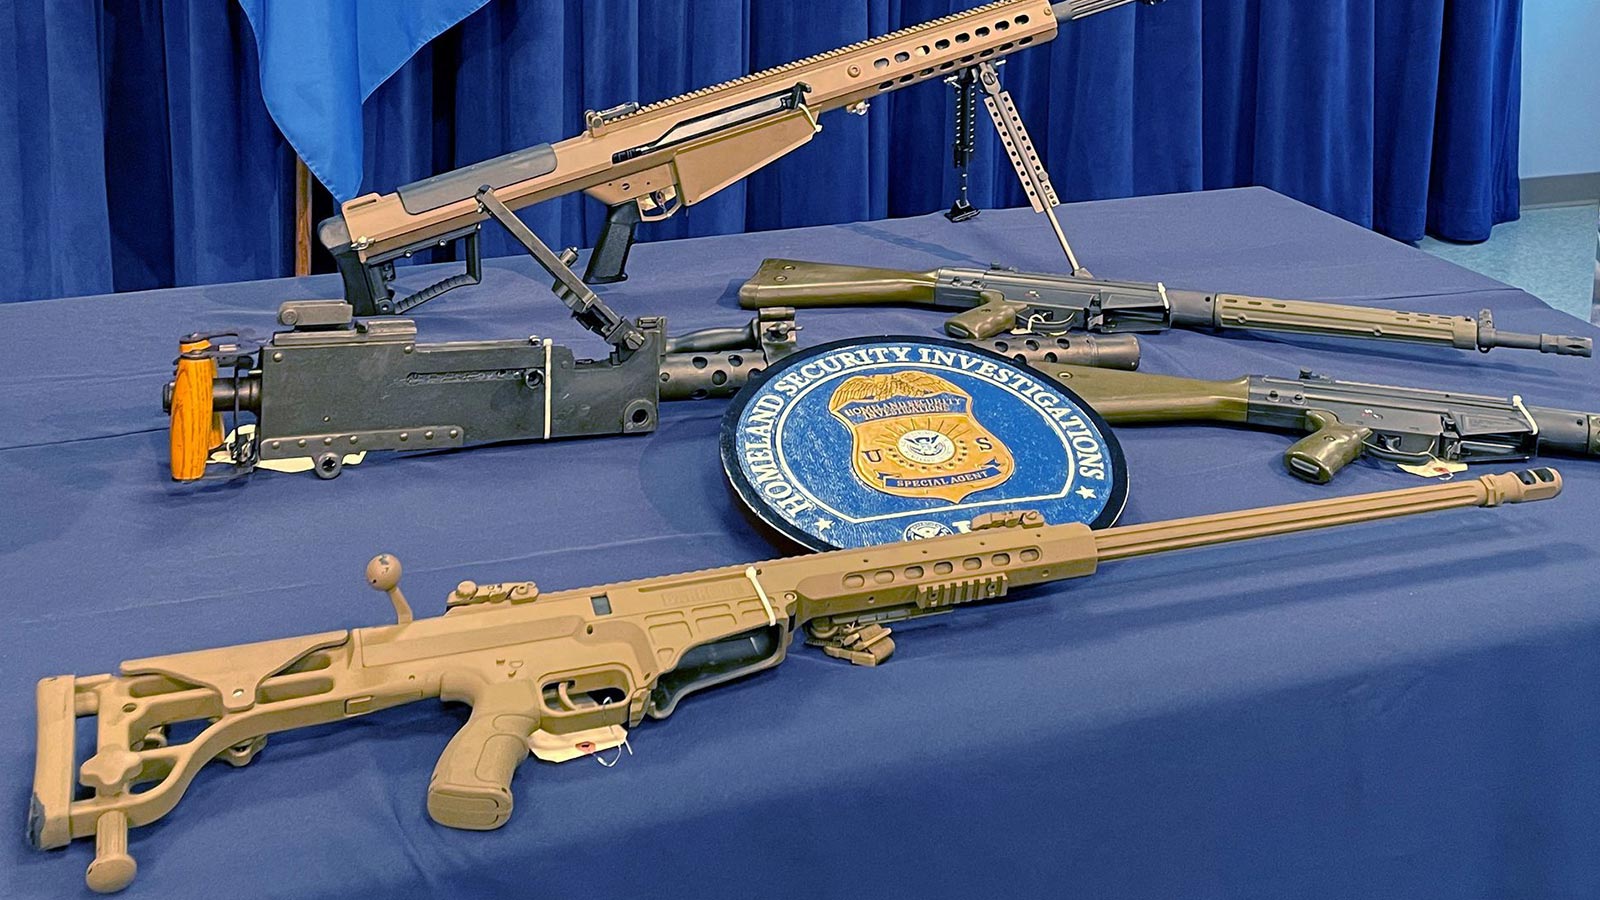 Weapons seized by U.S. authorities that had been destined for illegal export to Haiti are displayed during a news conference in Miami, Florida, U.S. August 17, 2022.